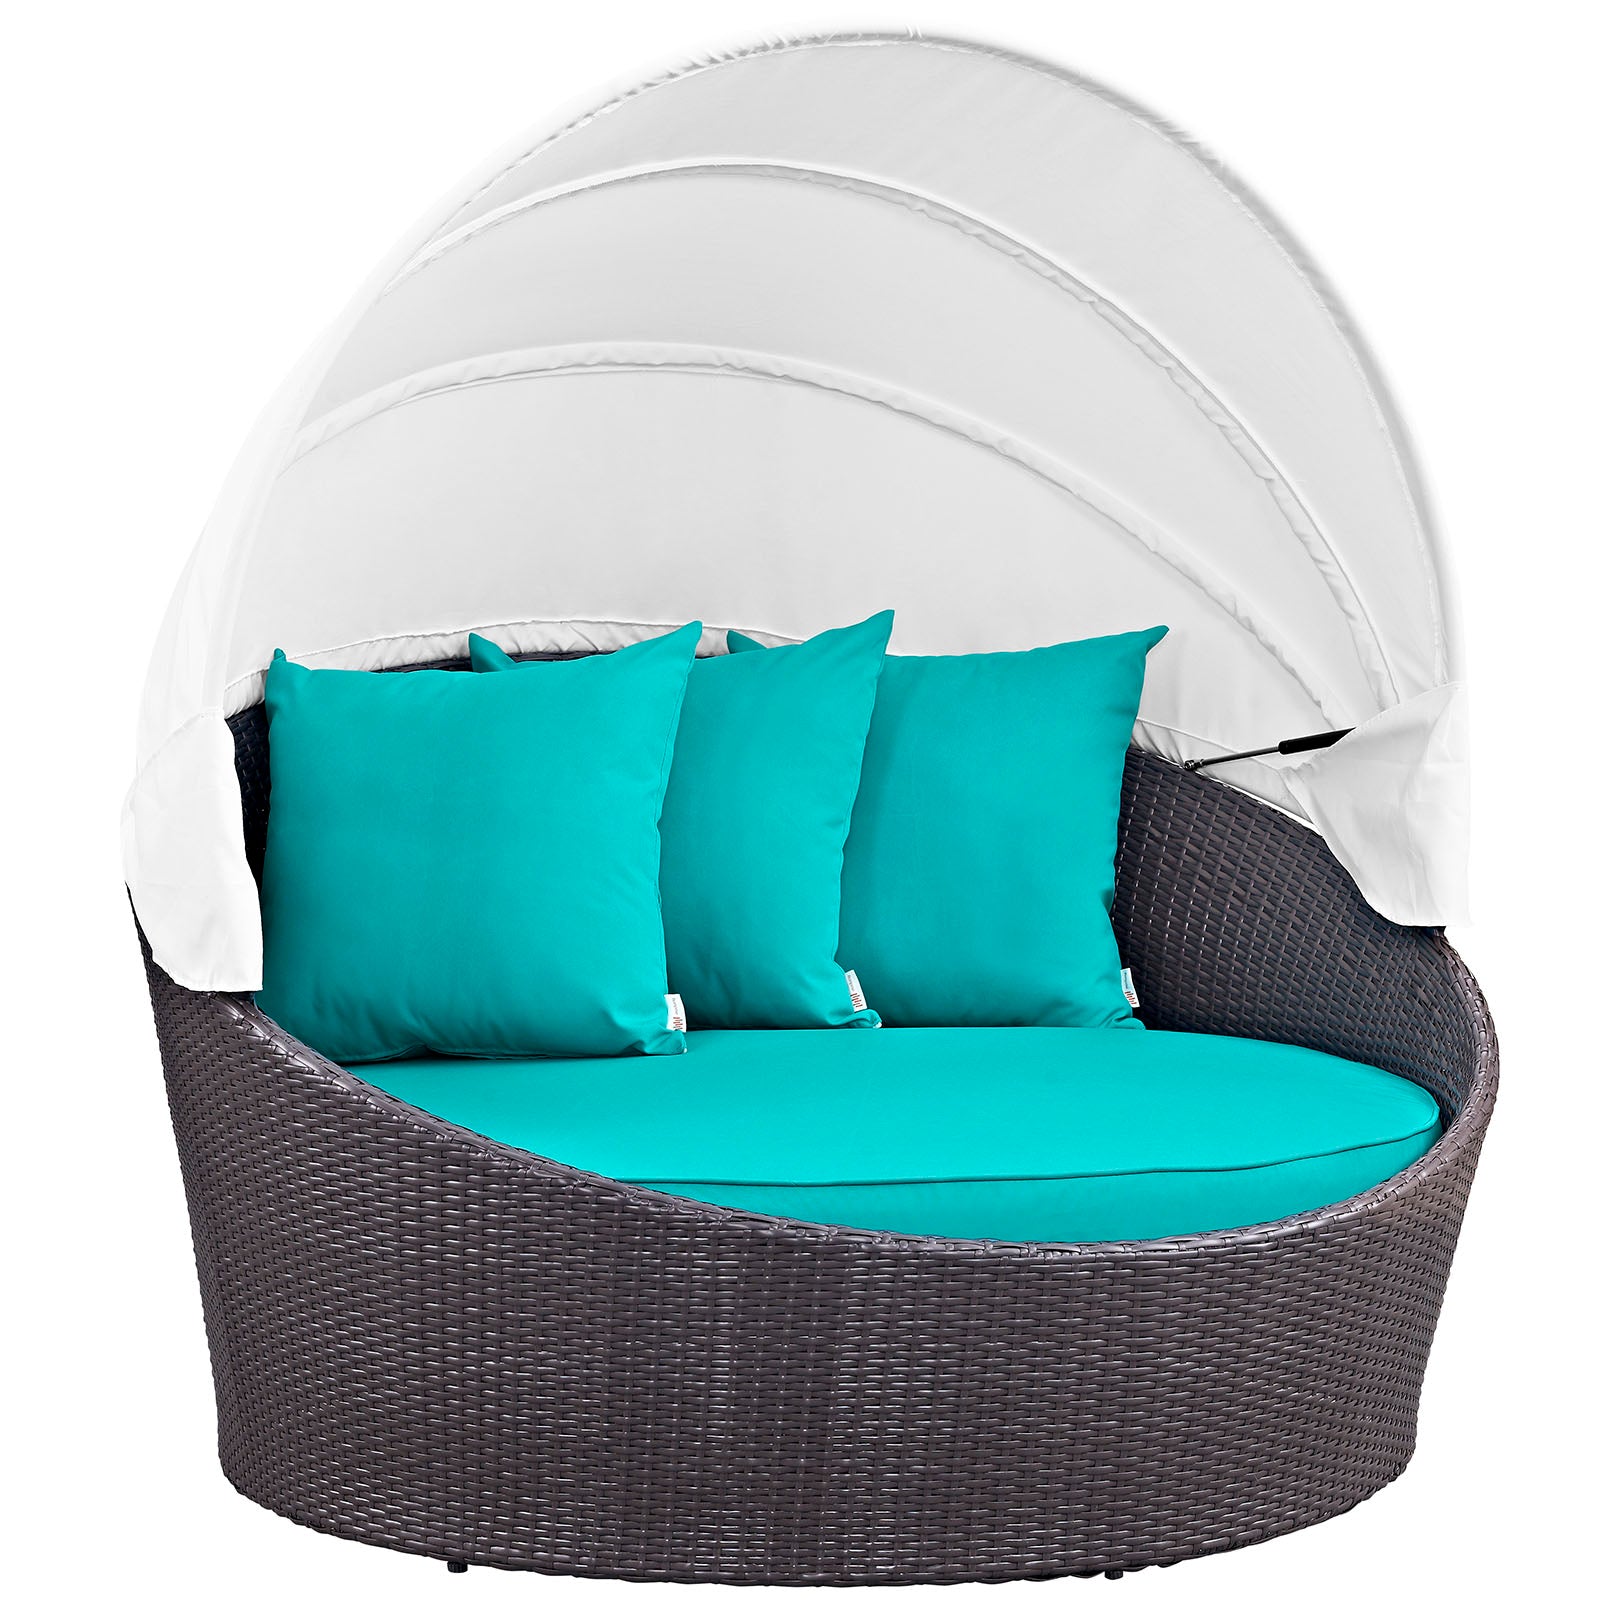 Modway Patio Daybeds - Convene Canopy Outdoor Patio Daybed Espresso Turquoise